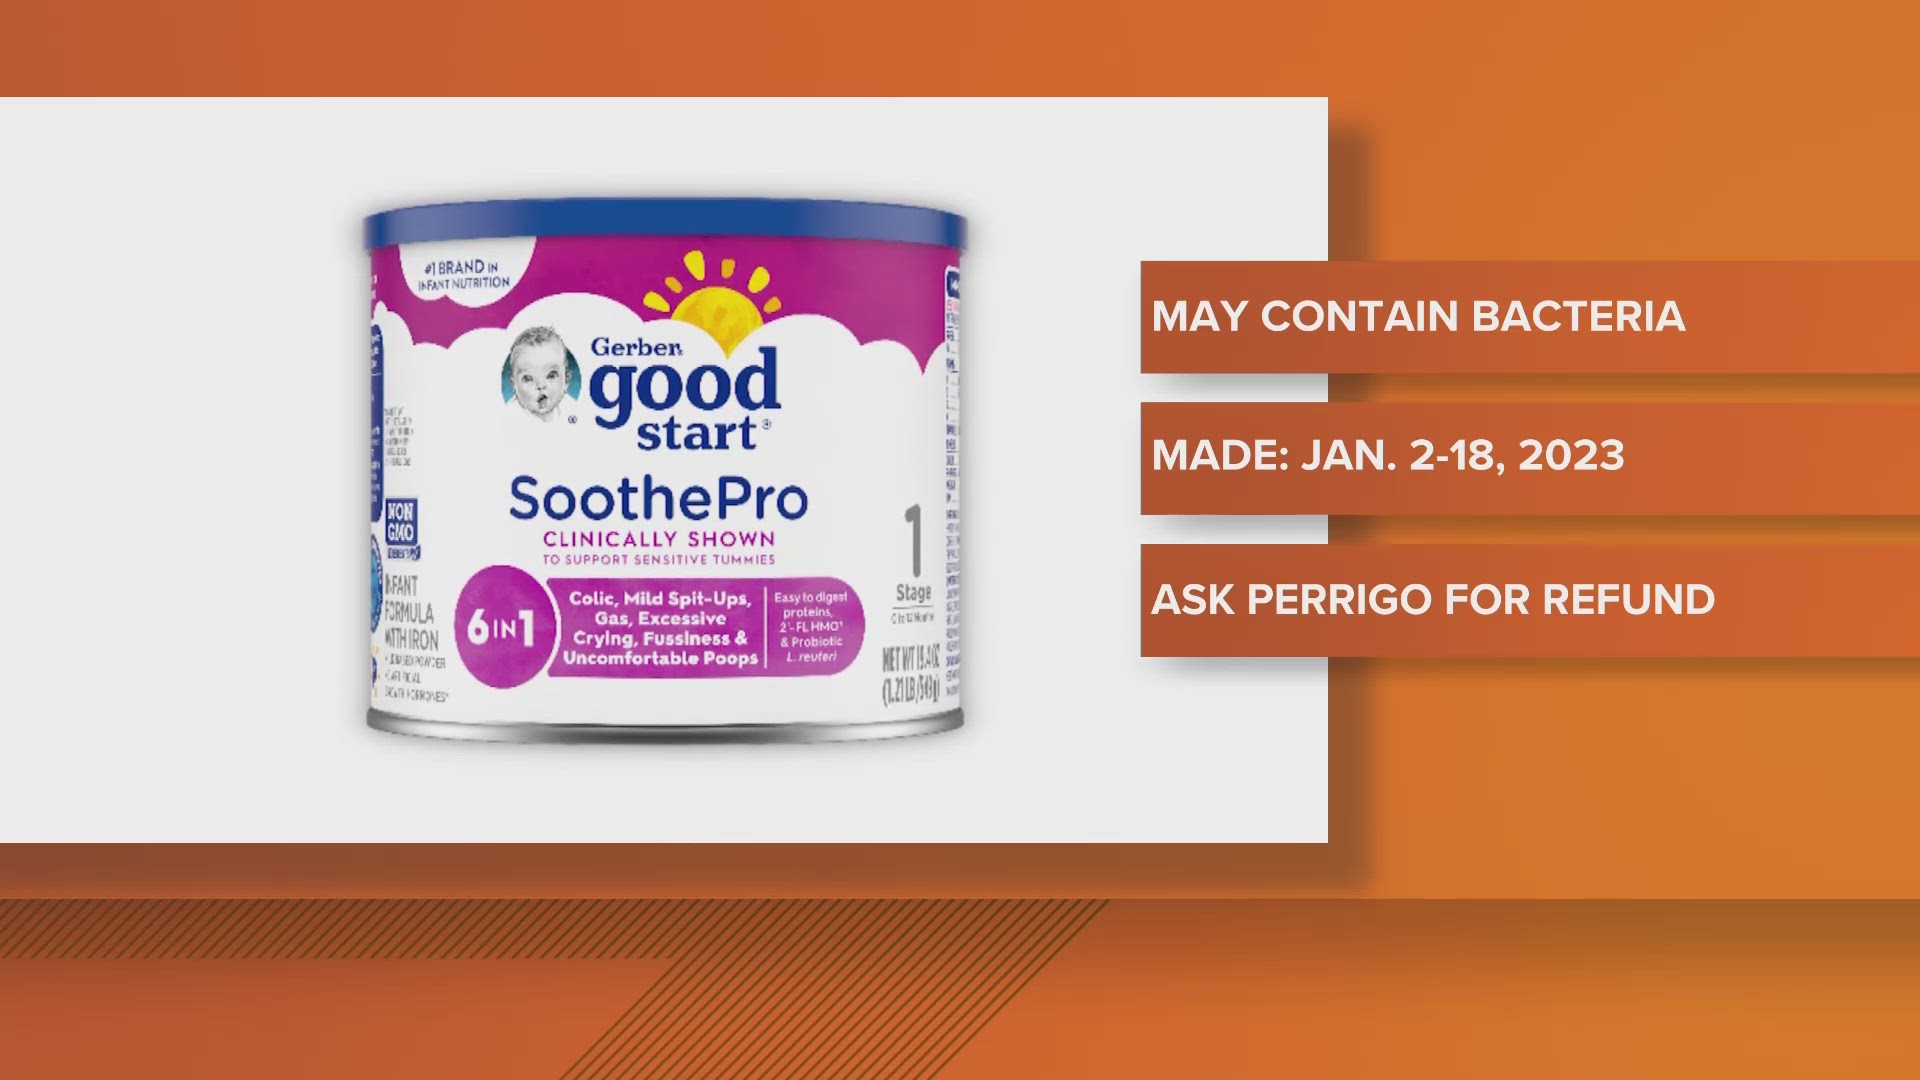 The company announced on Friday it is recalling some of its Gerber Good Start Soothe Pro powdered infant formula because it may be contaminated with bacteria.